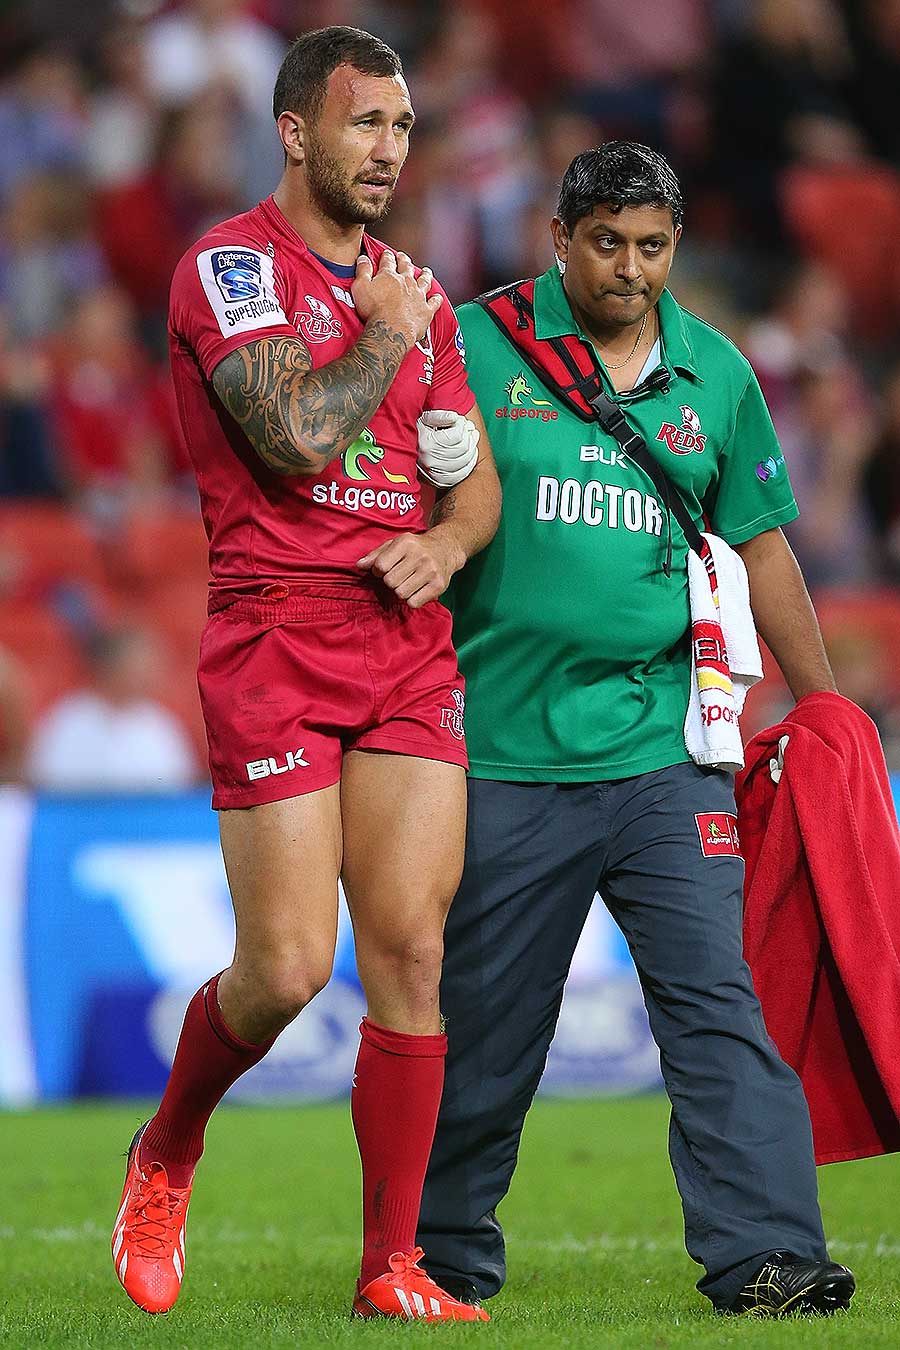 The Reds' Quade Cooper leaves the pitch with a shoulder injury